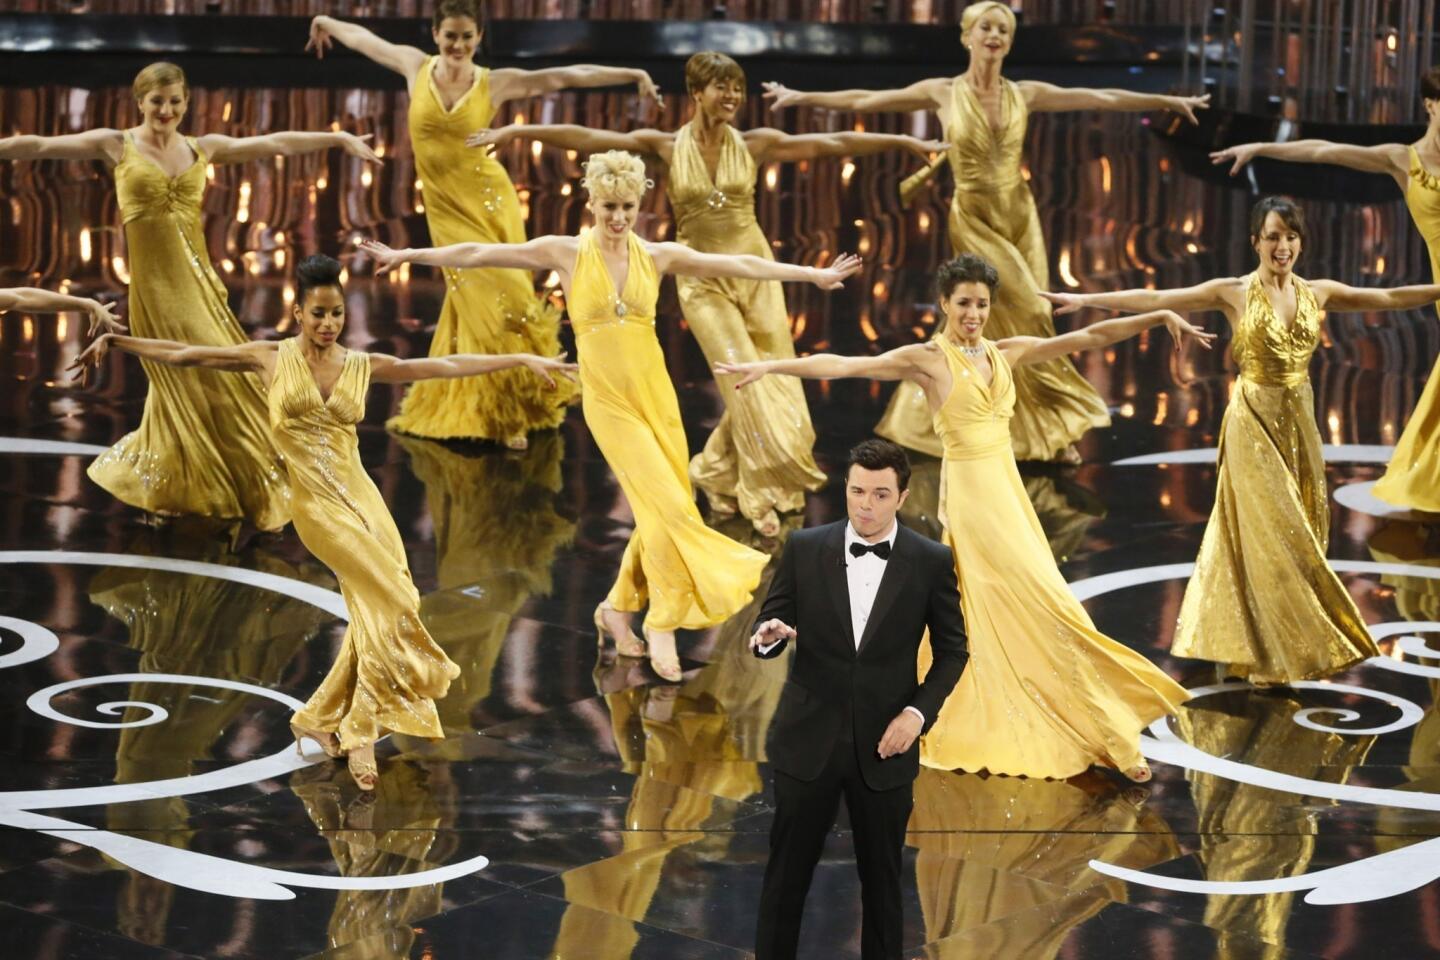 The academy took a gamble by having Seth MacFarlane host the 85th awards. Some people thought the many moments that MacFarlane relied on jokes about race or women were inappropriate for the occasion, including his cringe-worthy opening number, "We Saw Your Boobs."